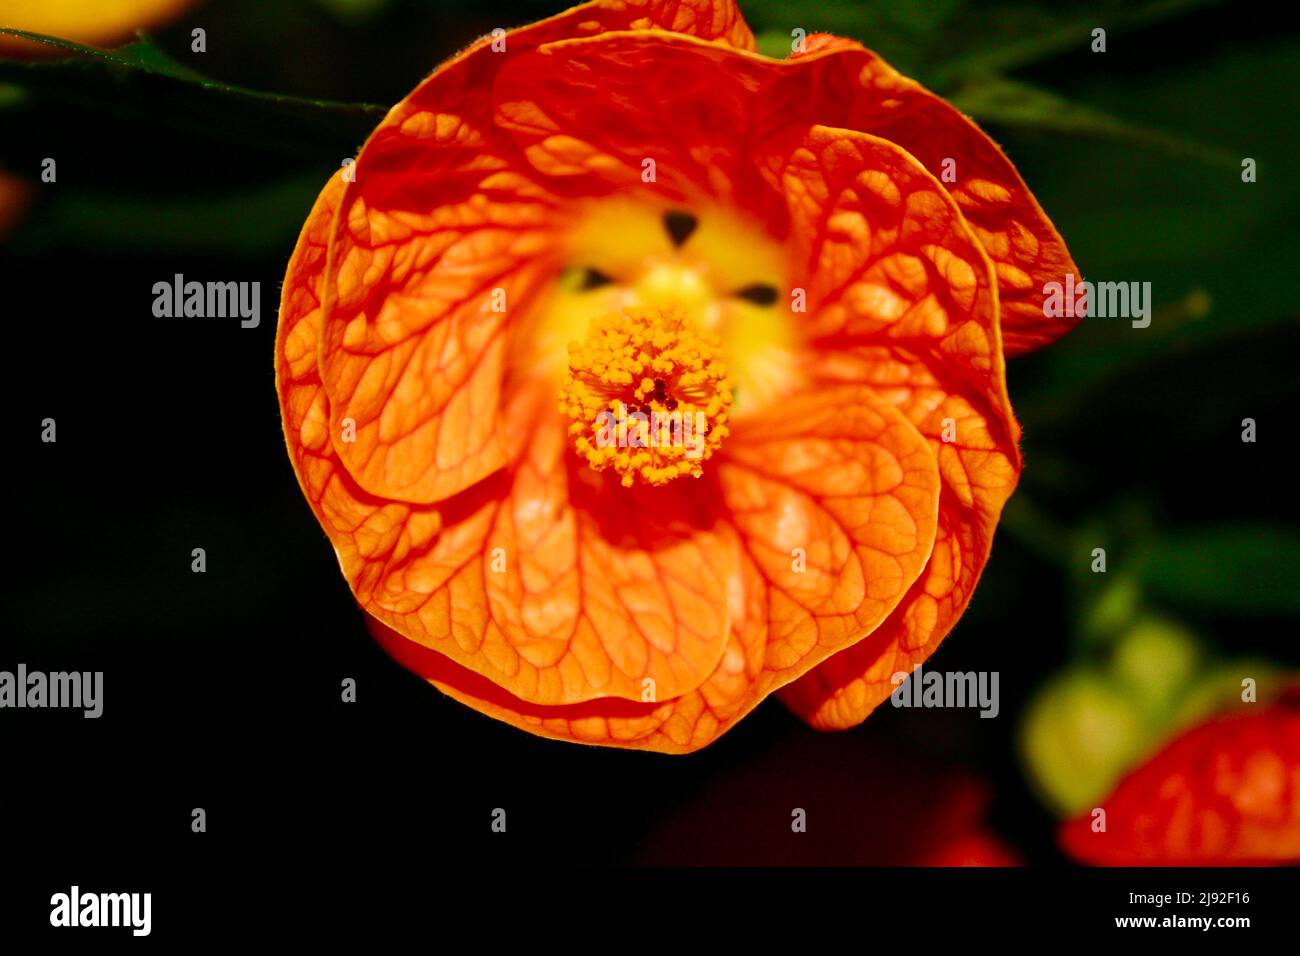 Orange and yellow flower that looks like a lion Stock Photo